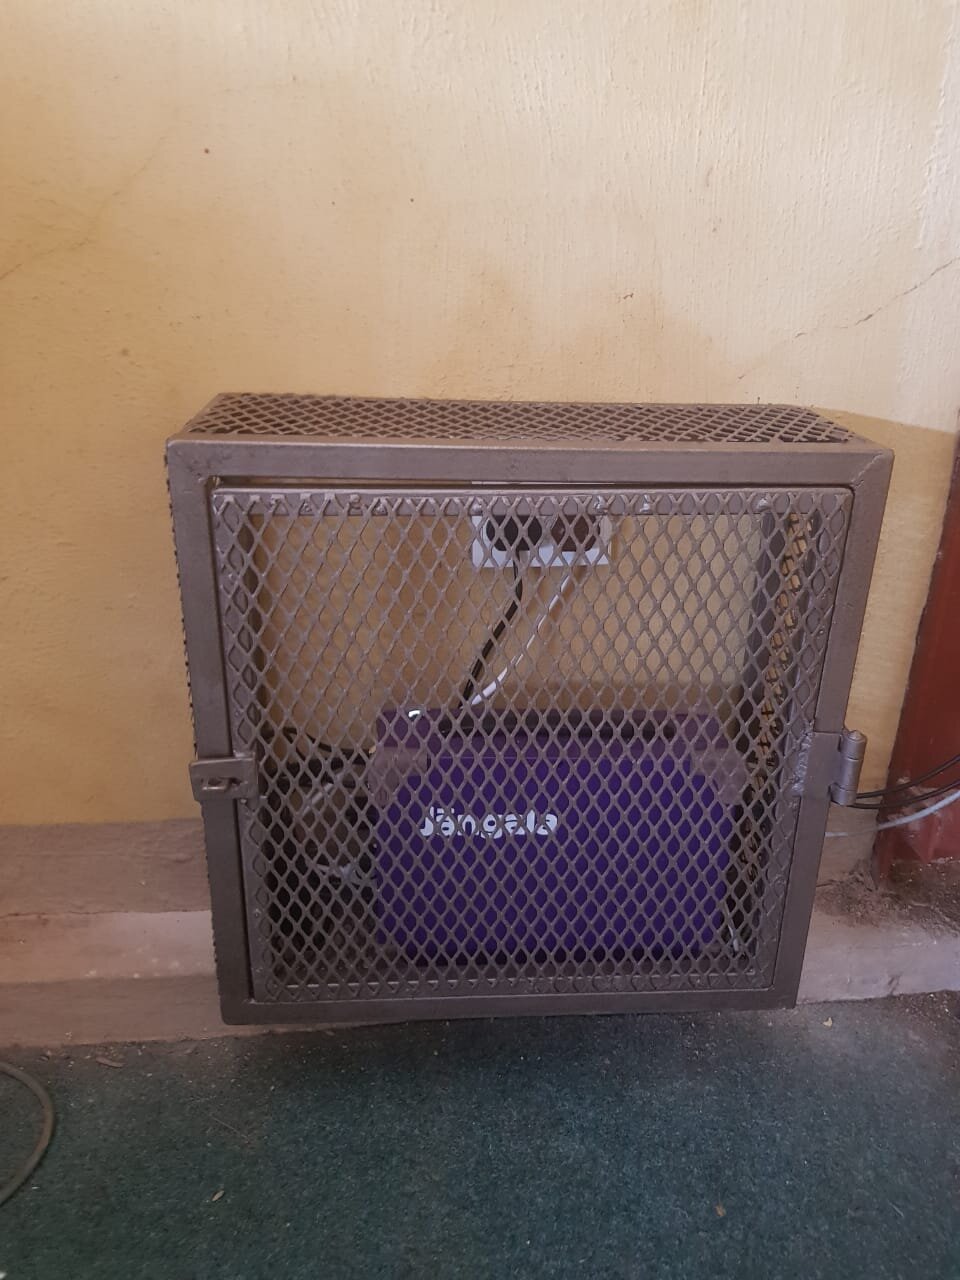 Embo Big Box in a cage.jpeg